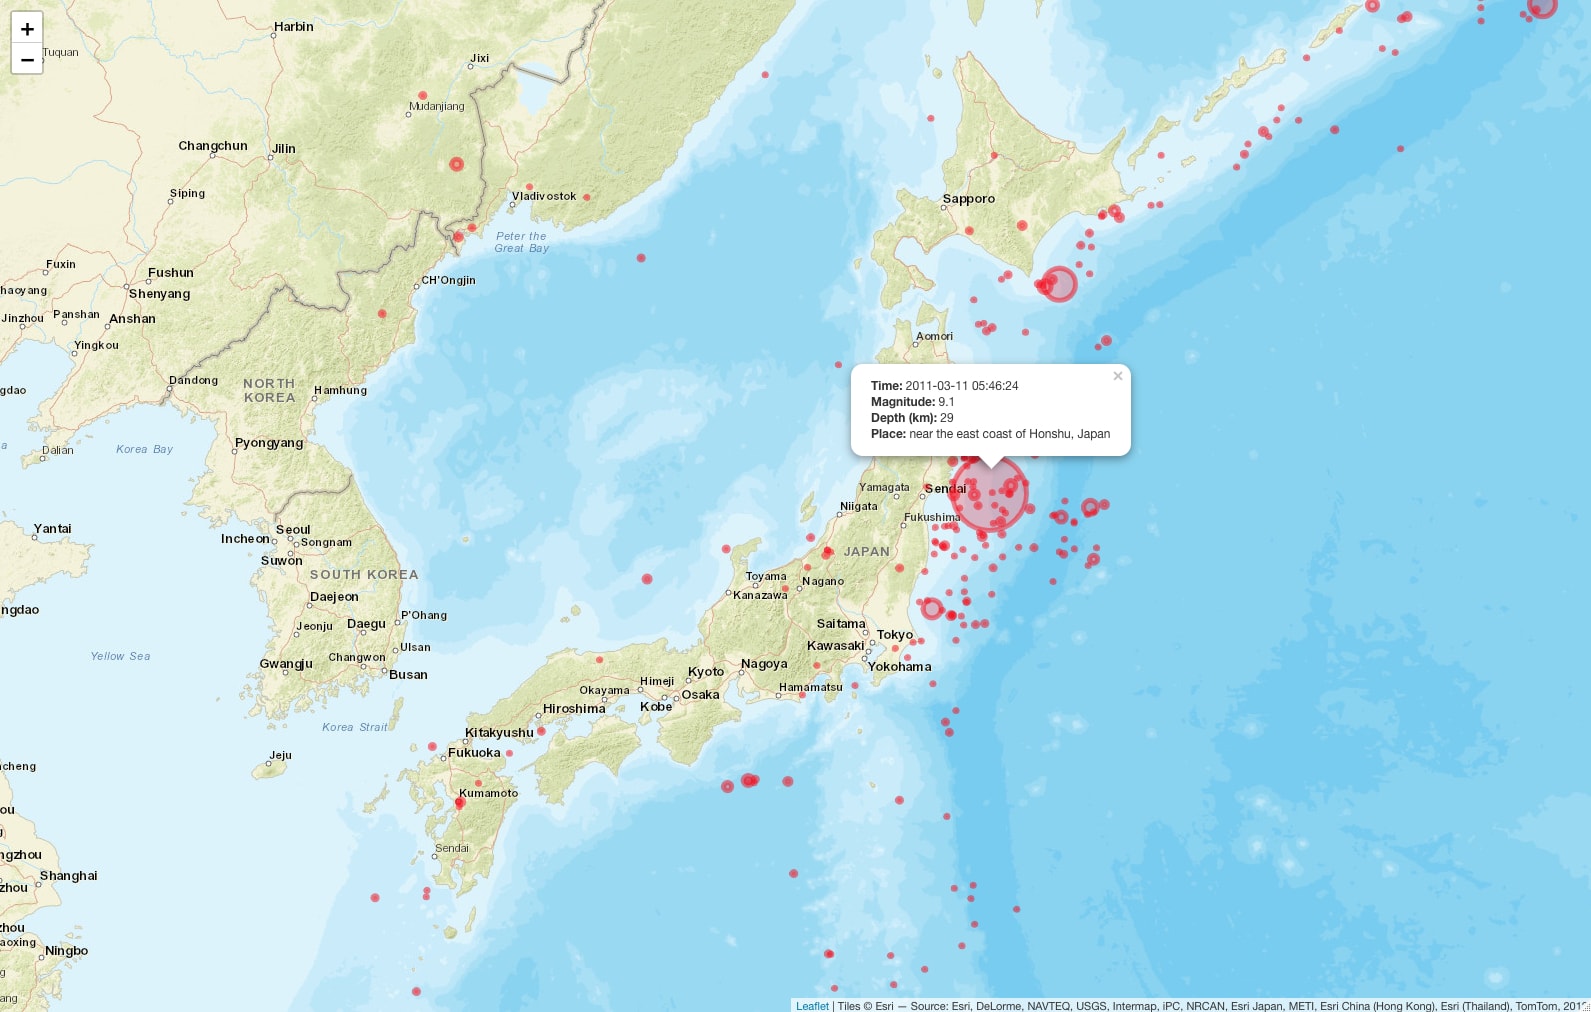 Image 7 - Final geomap of Earthquakes near Japan from 2001 to 2018 (with added popups)